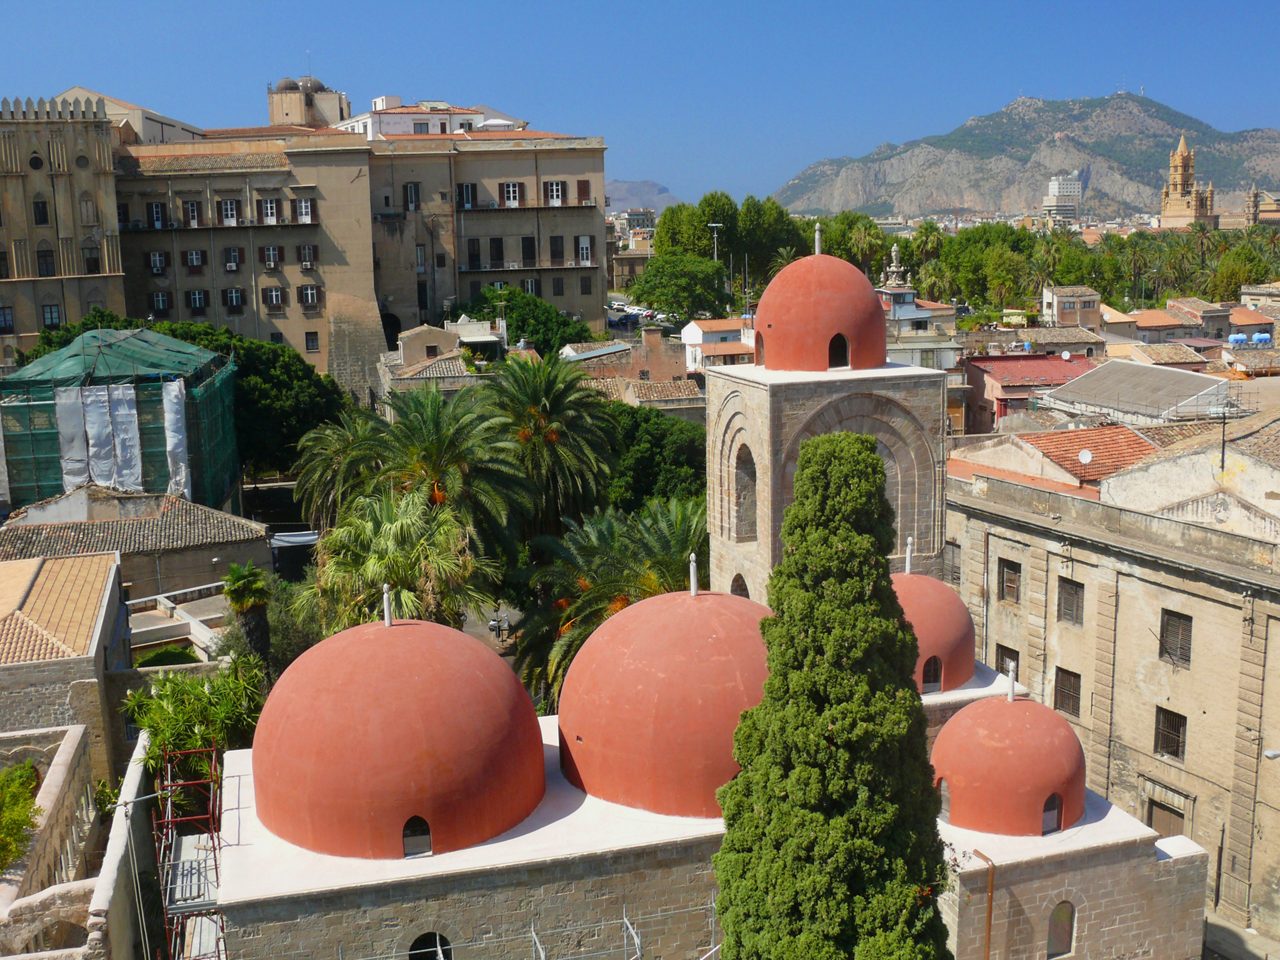 St Giovanni, a normannic church in Palermo